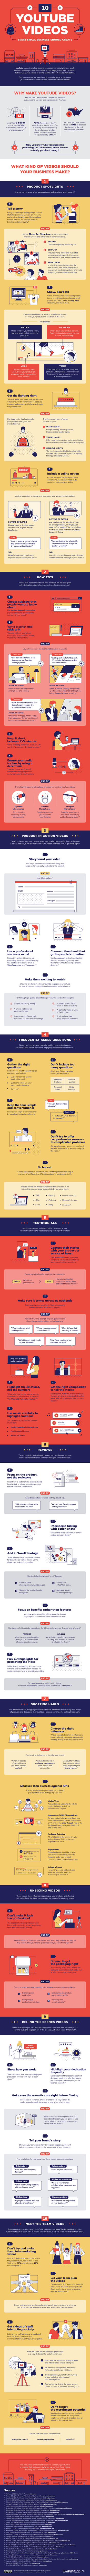 10 Types of YouTube Video ideas infographic